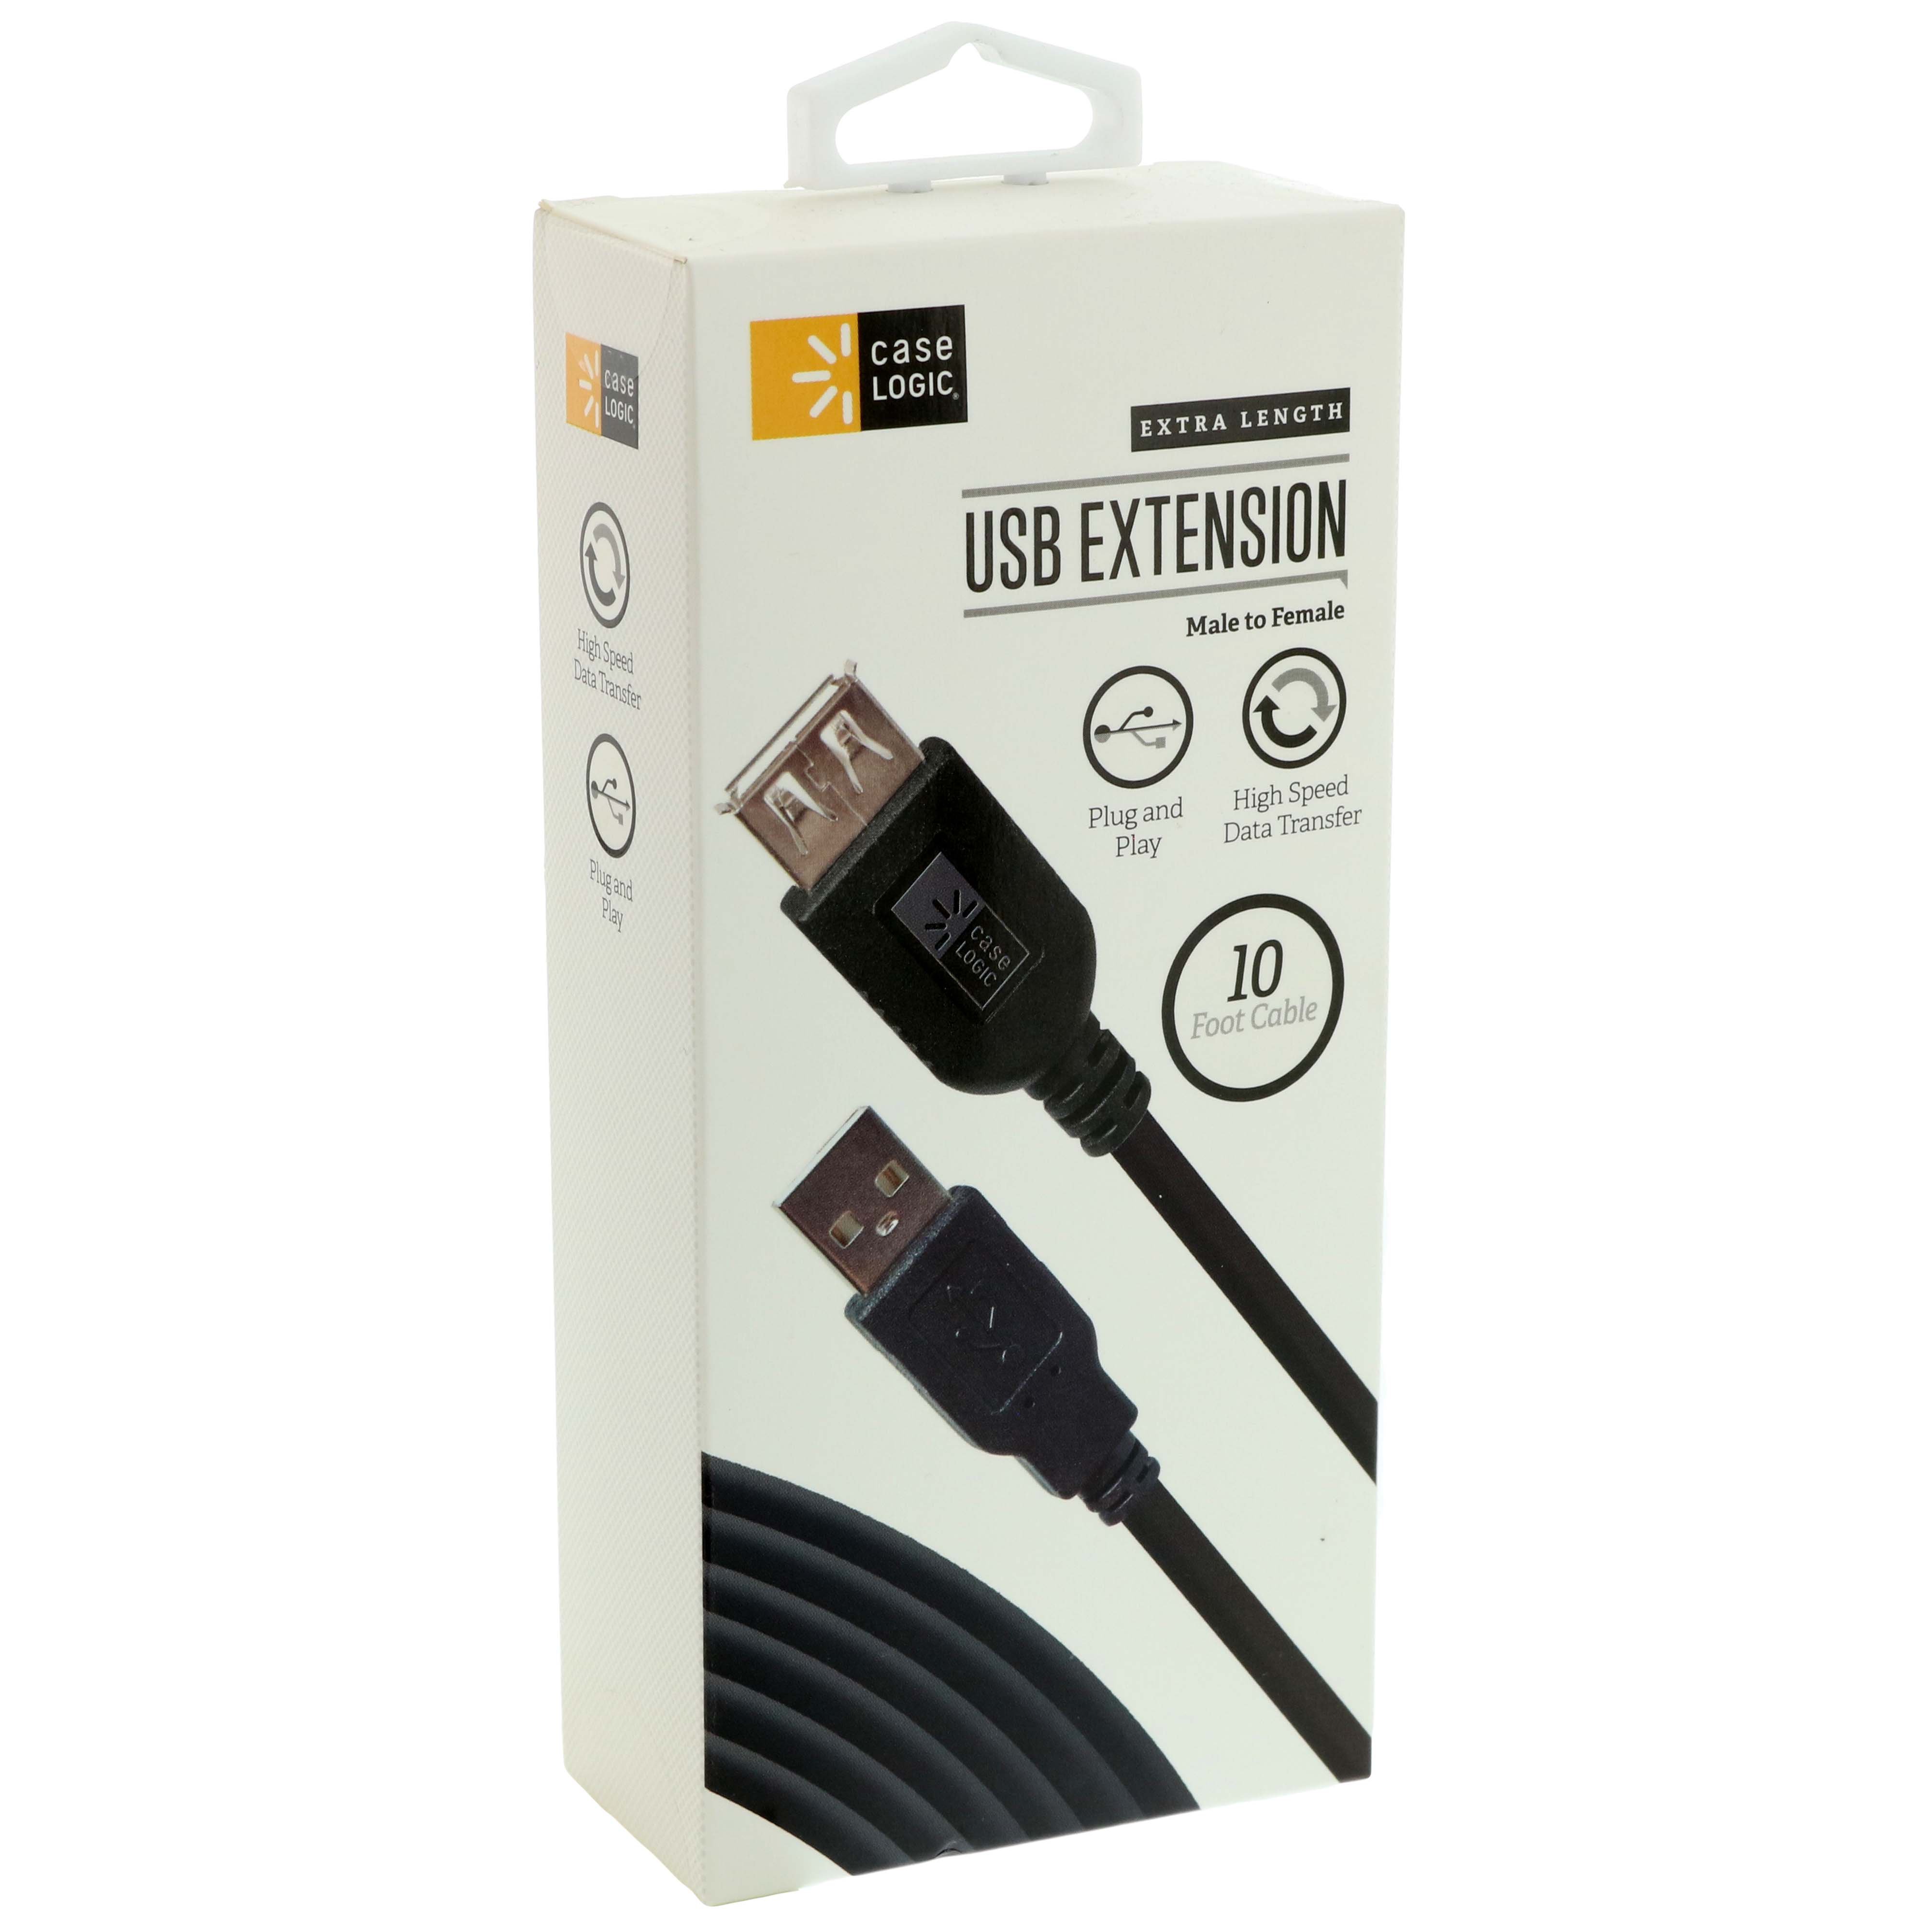 Case Logic HDMI to HDMI Cable - Shop Connection Cables at H-E-B